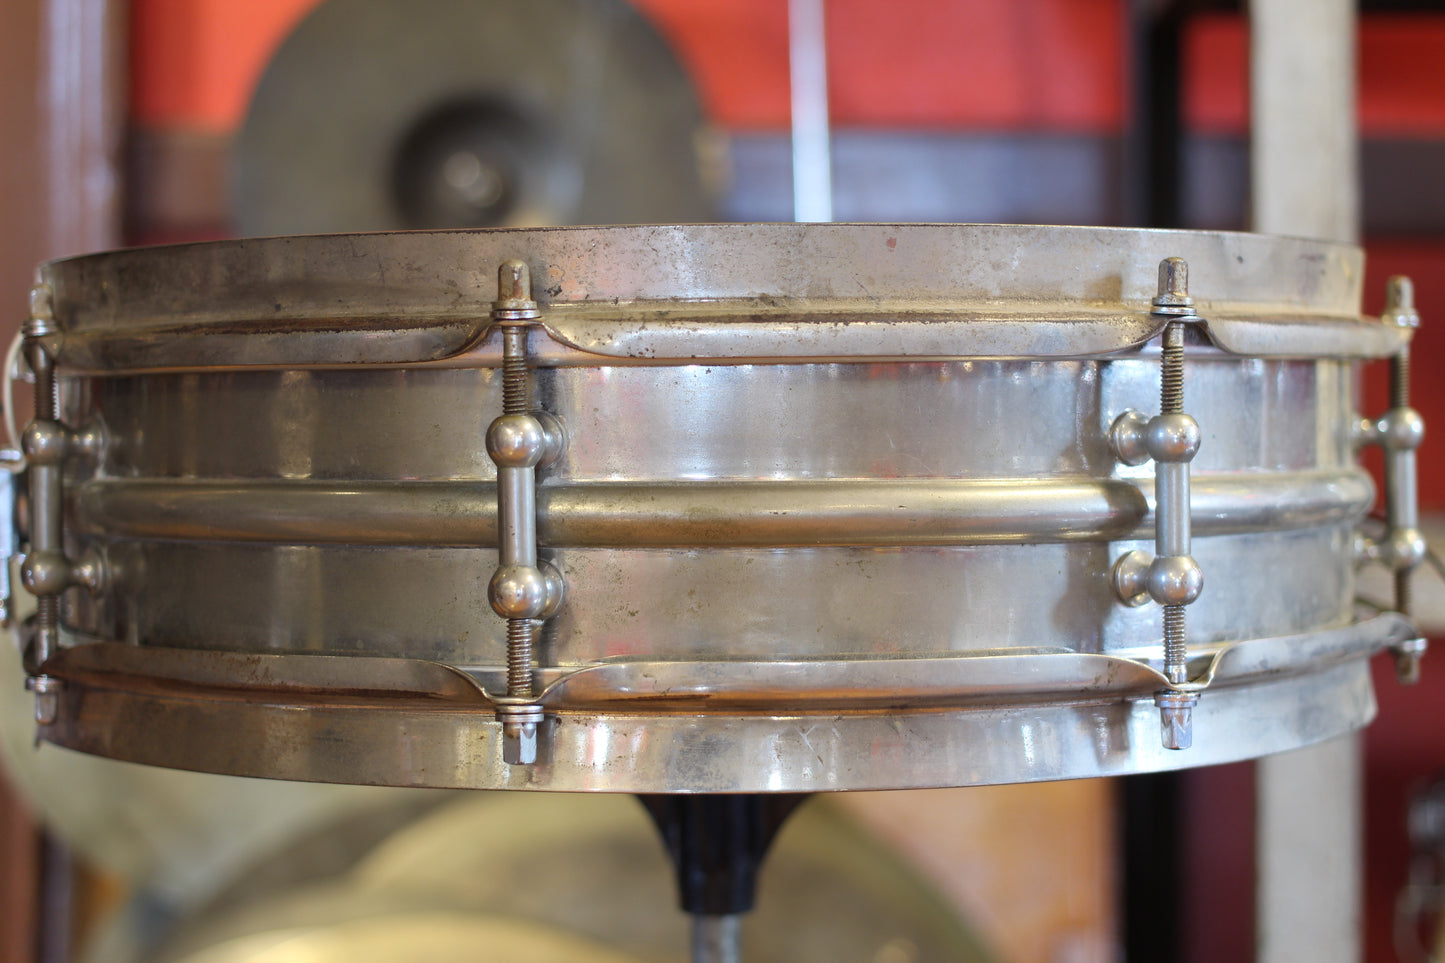 1920's Ludwig 'Dance Model' Snare Drum 4"x14" Nickel over Brass 2-Piece shell